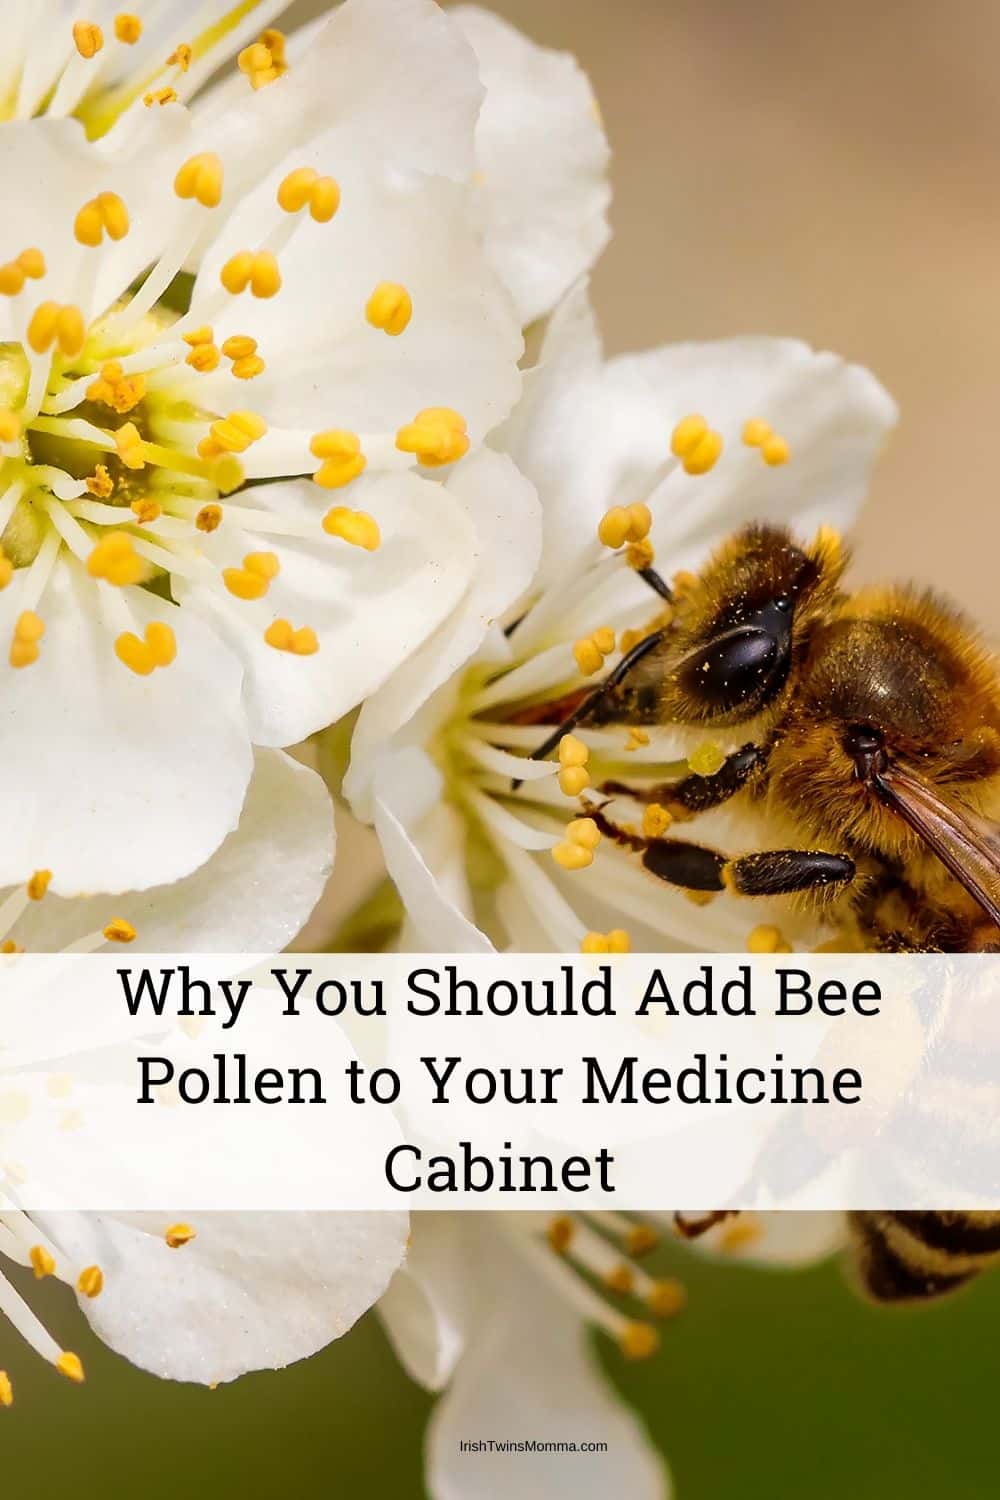 Why You Should Add Bee Pollen to Your Medicine Cabinet